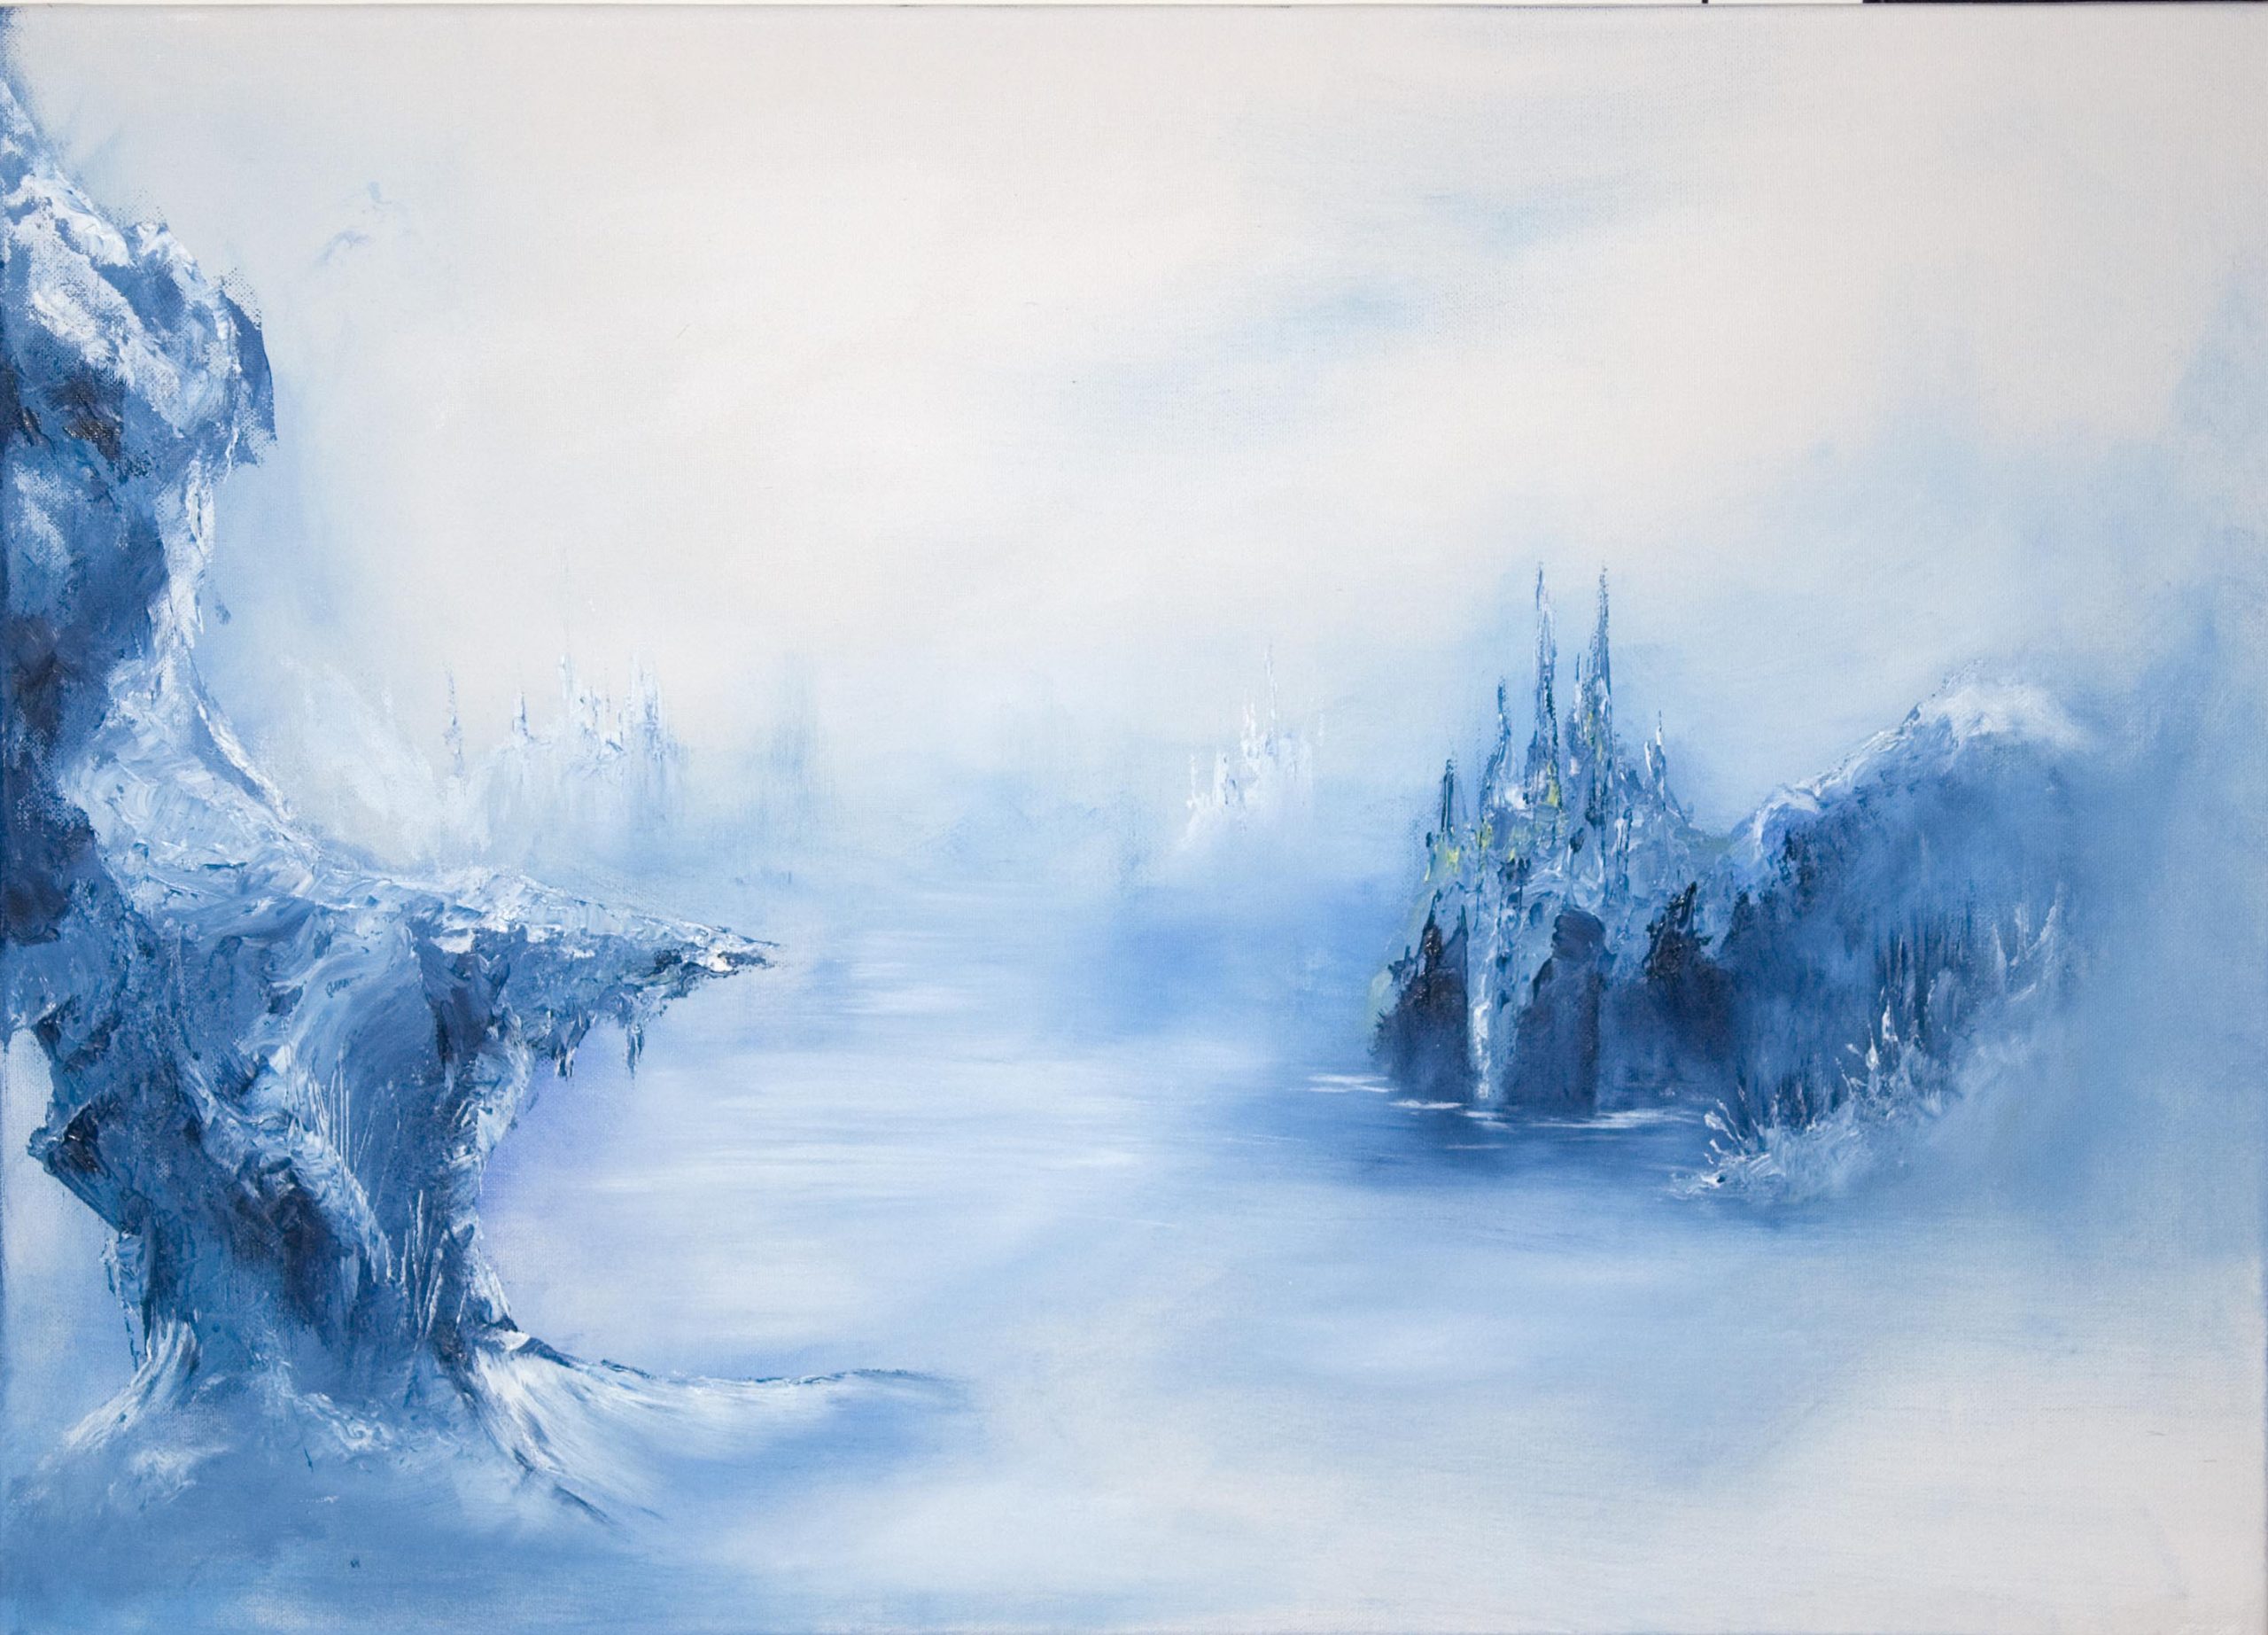 "Under Ice" - Part of a series of fantasy paintings depicting an ancient alien civilization on an abandoned planet. These paintings use large brushes and palette knives to suggest detail using oil paints, rather than deliberate re-creation of detail with fine brushes. Oil on stretched canvas. 2006